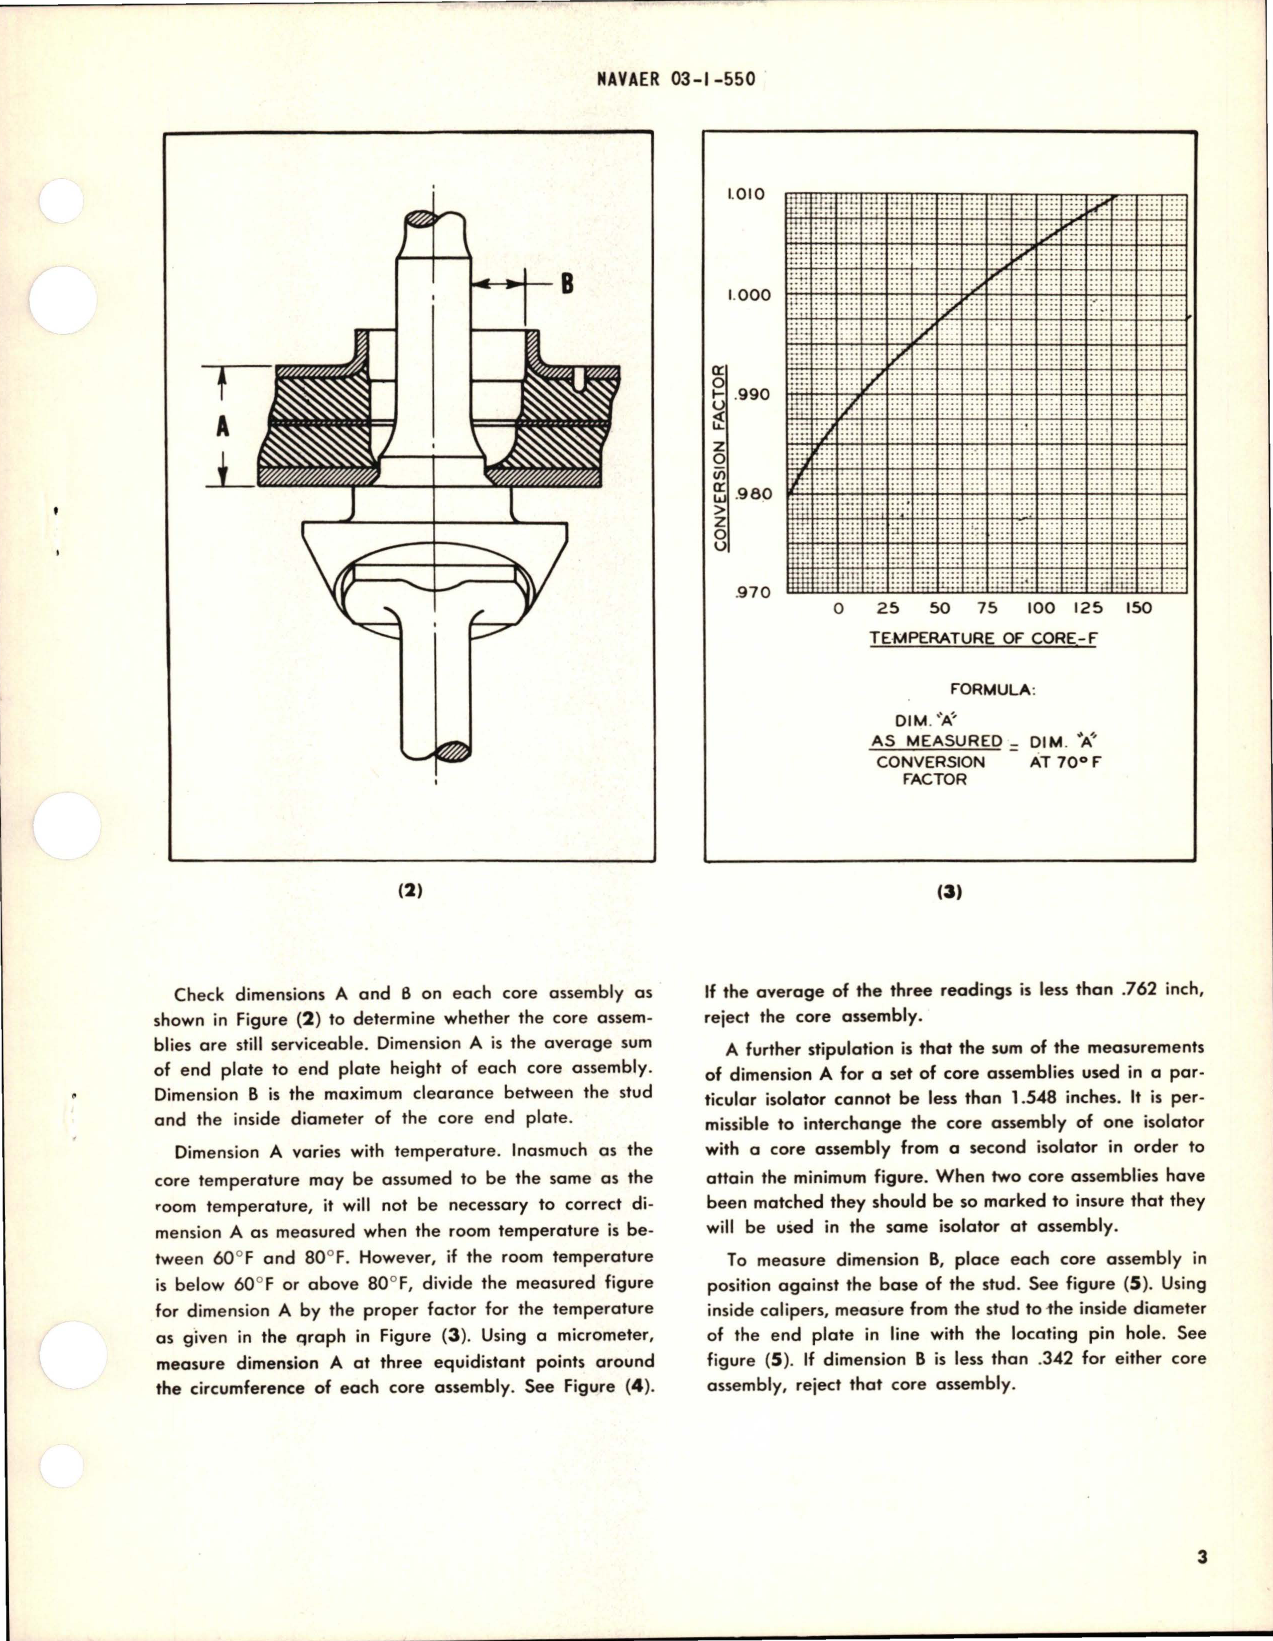 Sample page 5 from AirCorps Library document: Instructions with Parts List for Engine Vibration Isolators - MB-100875 and MB-100876